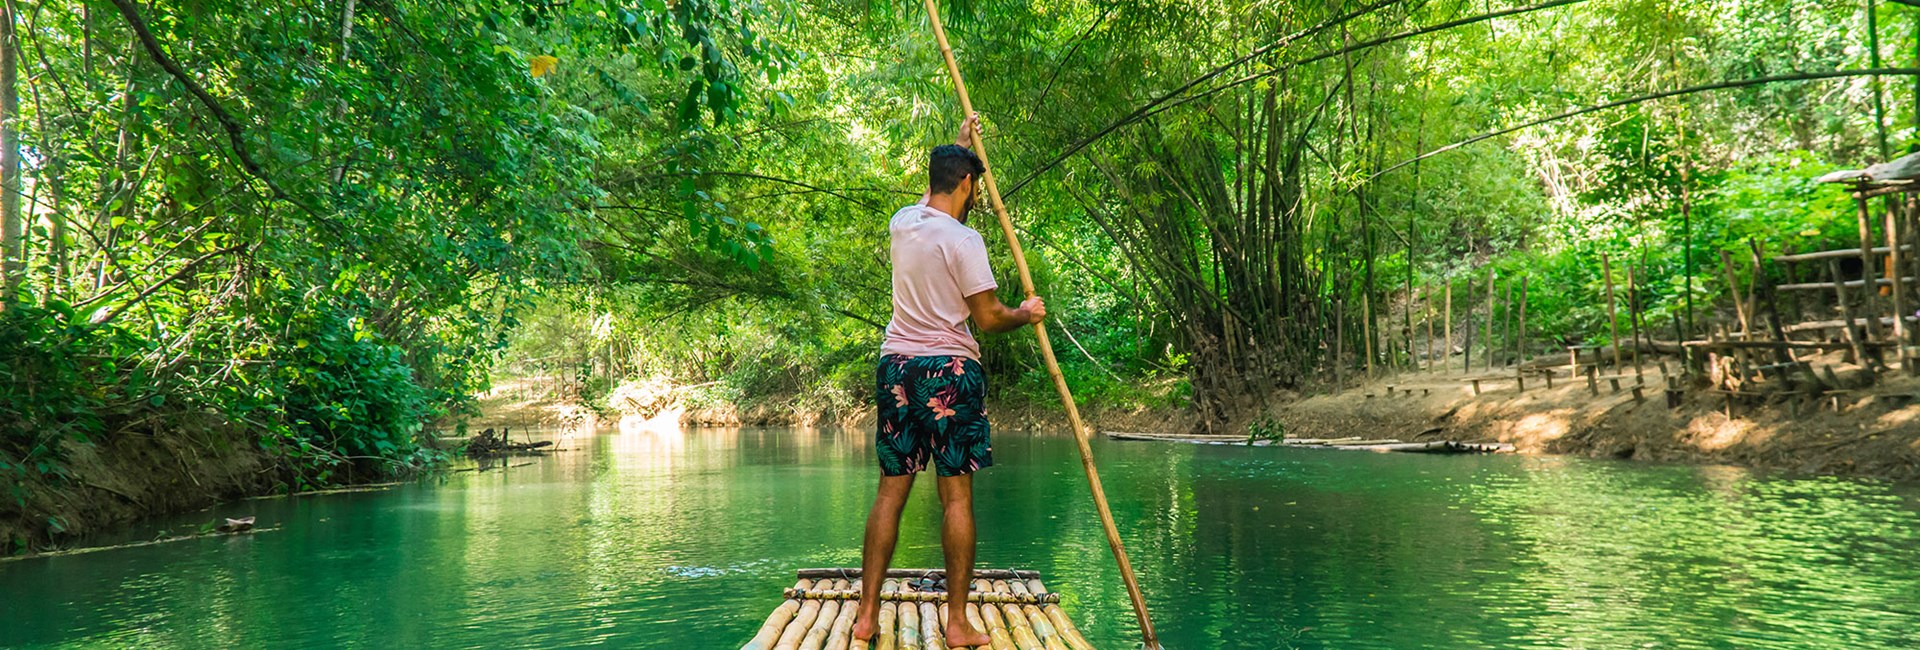 Man rowing bamboo raft along a bright green river in Jamaica